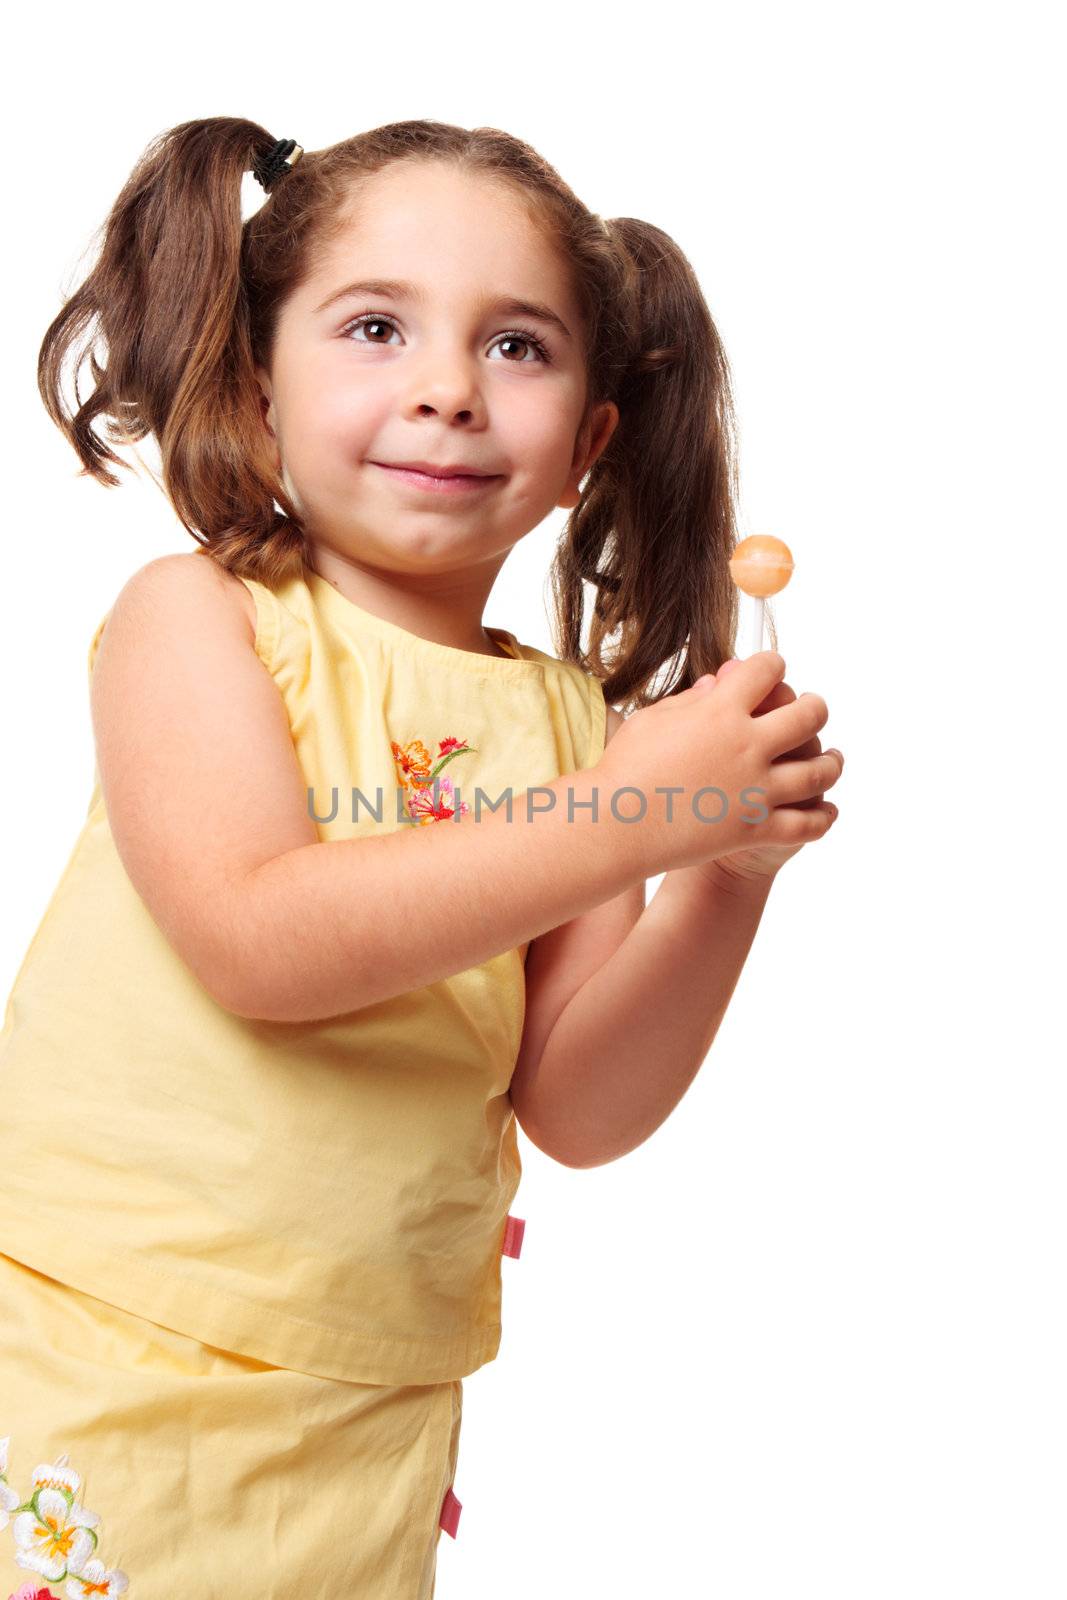 Little girl in ponytails holding a lollipop by lovleah